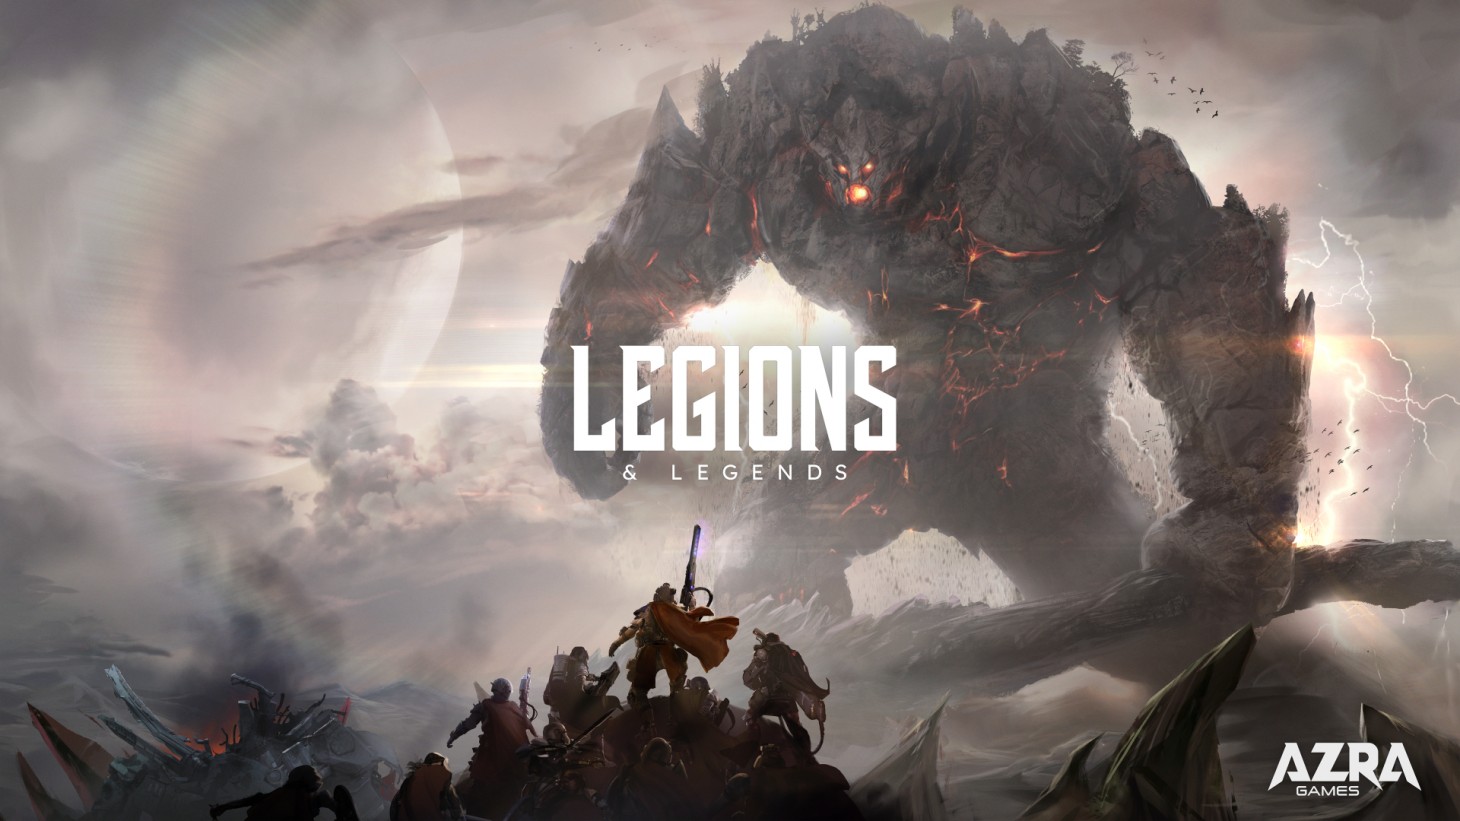 Game of Thrones' Is Getting a Mobile RPG 'Legends